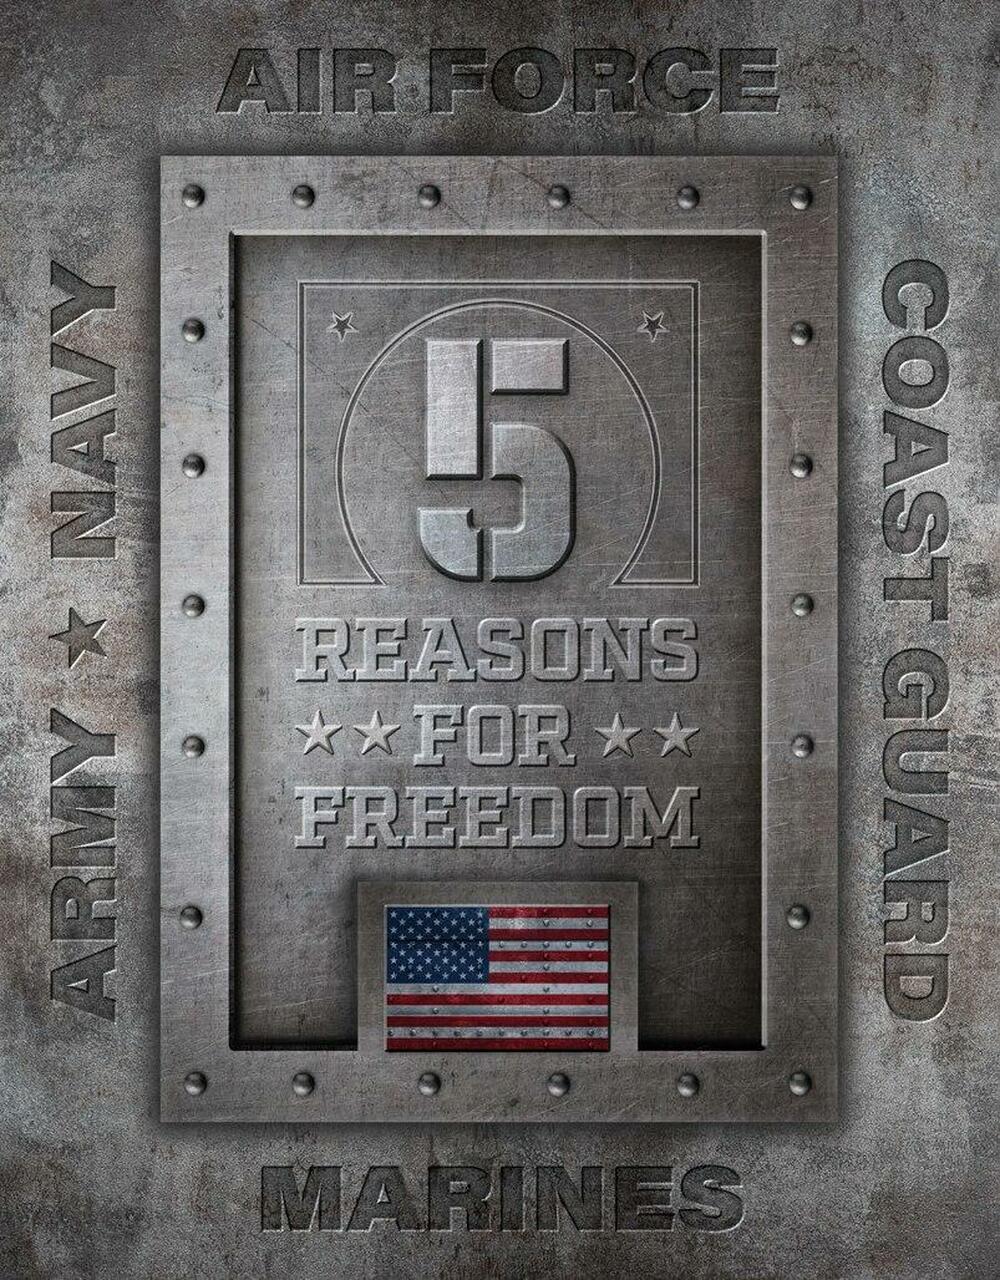 5 Reasons For Freedom Metal Tin Sign - 2432